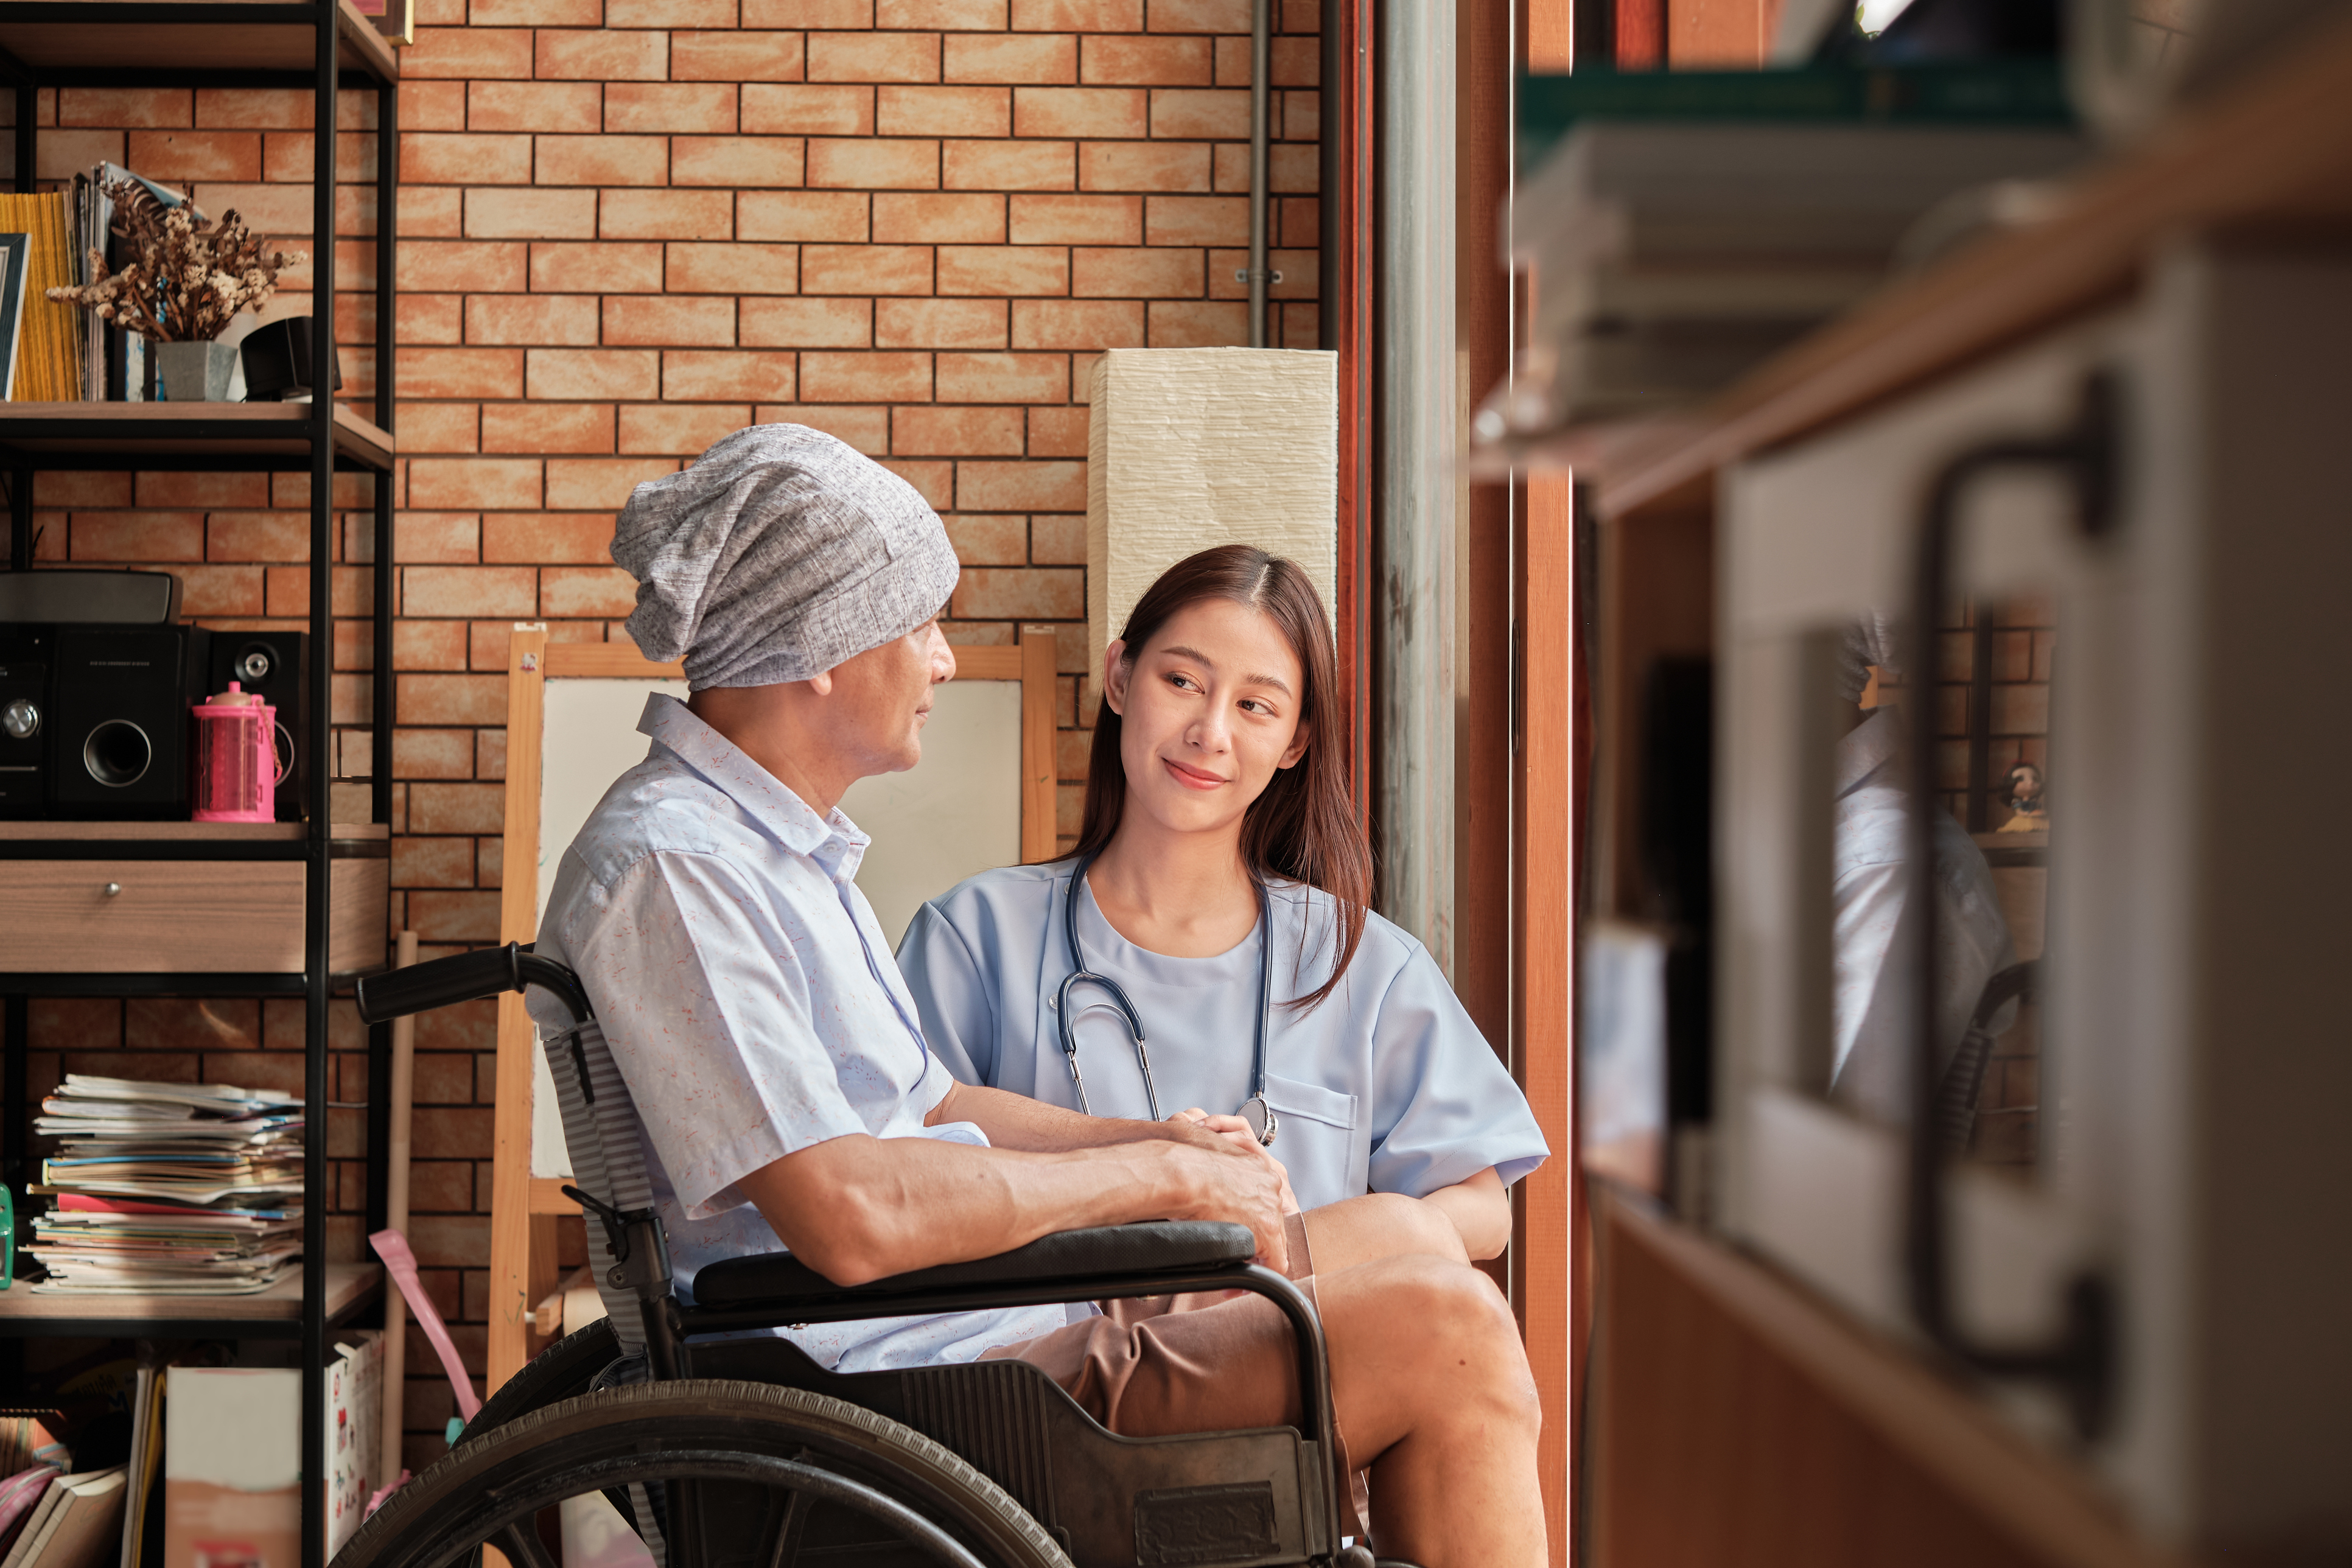 Cancer elderly patients in wheelchairs receive rehabilitation treatment in private home, Asian female doctor medical therapy treatments by talking to cure loneliness and encourage them with a smile.